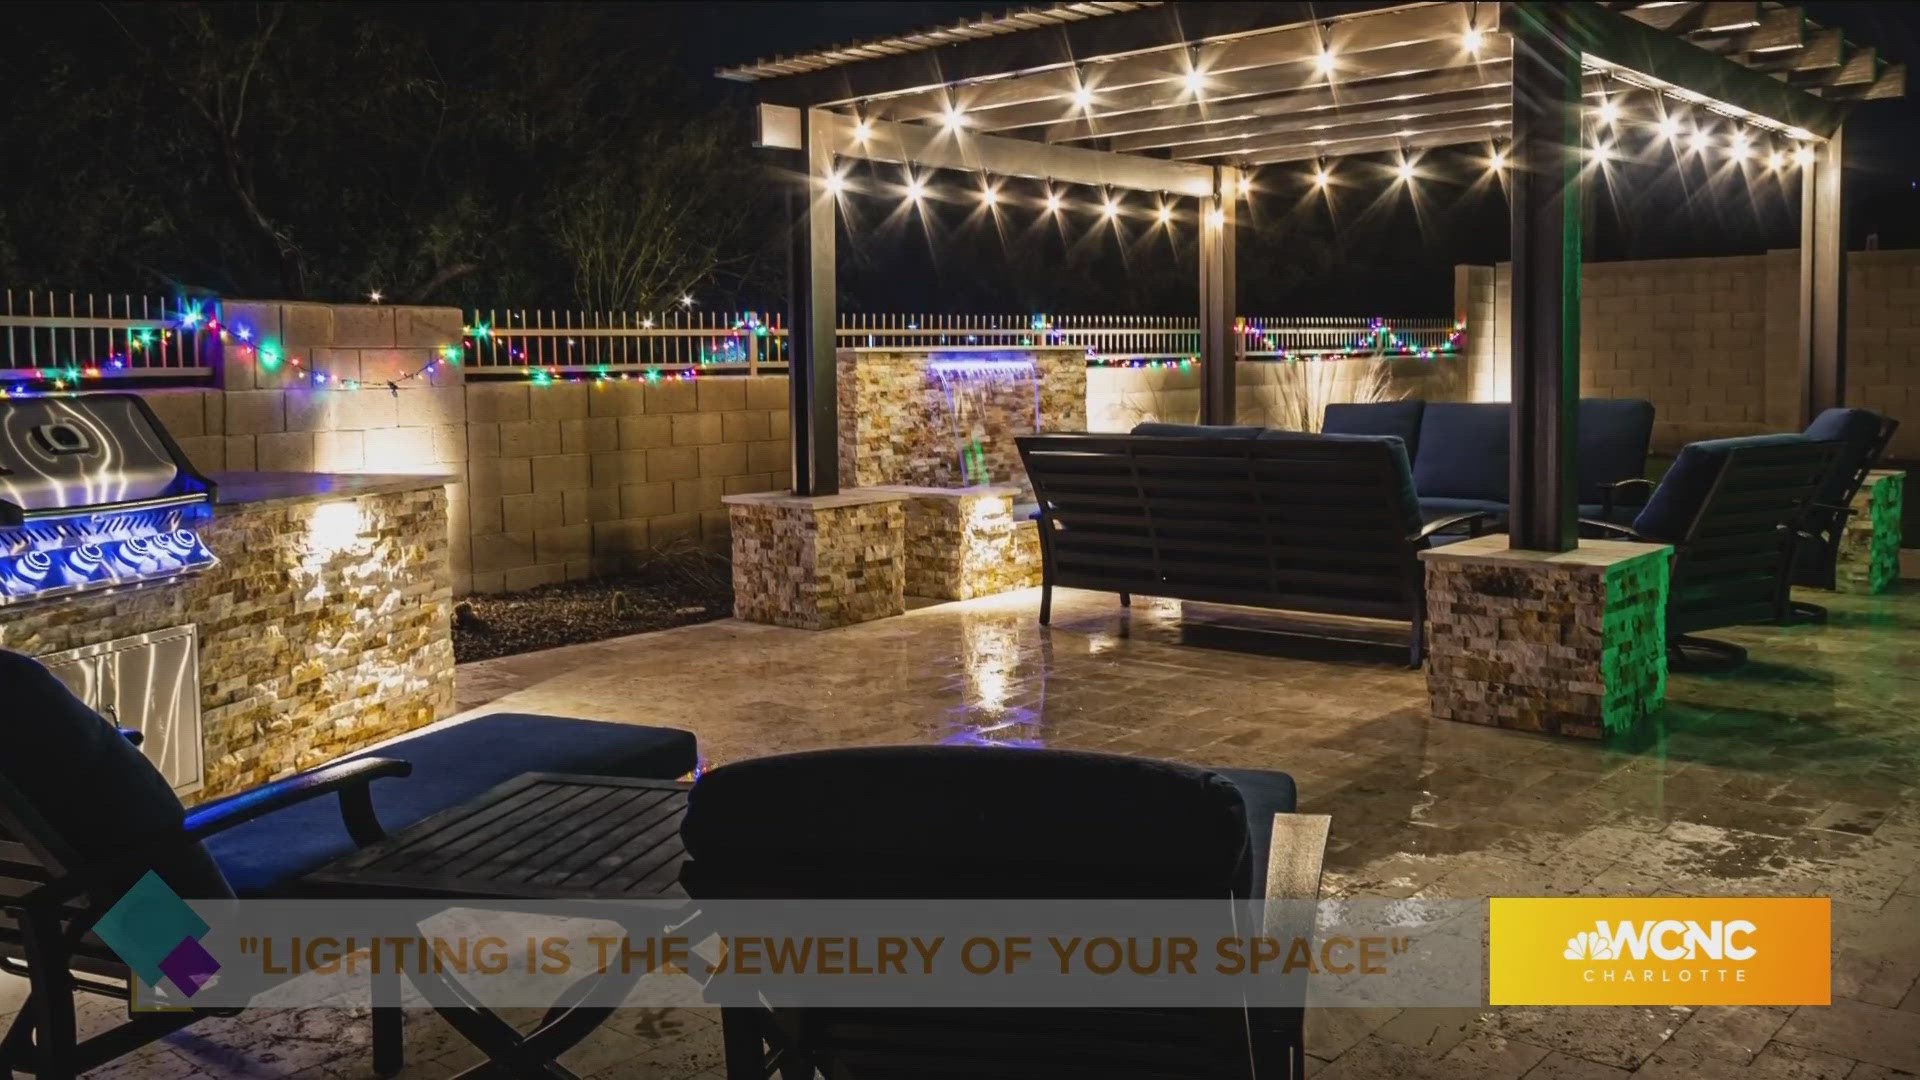 Make your outdoor spaces come alive!